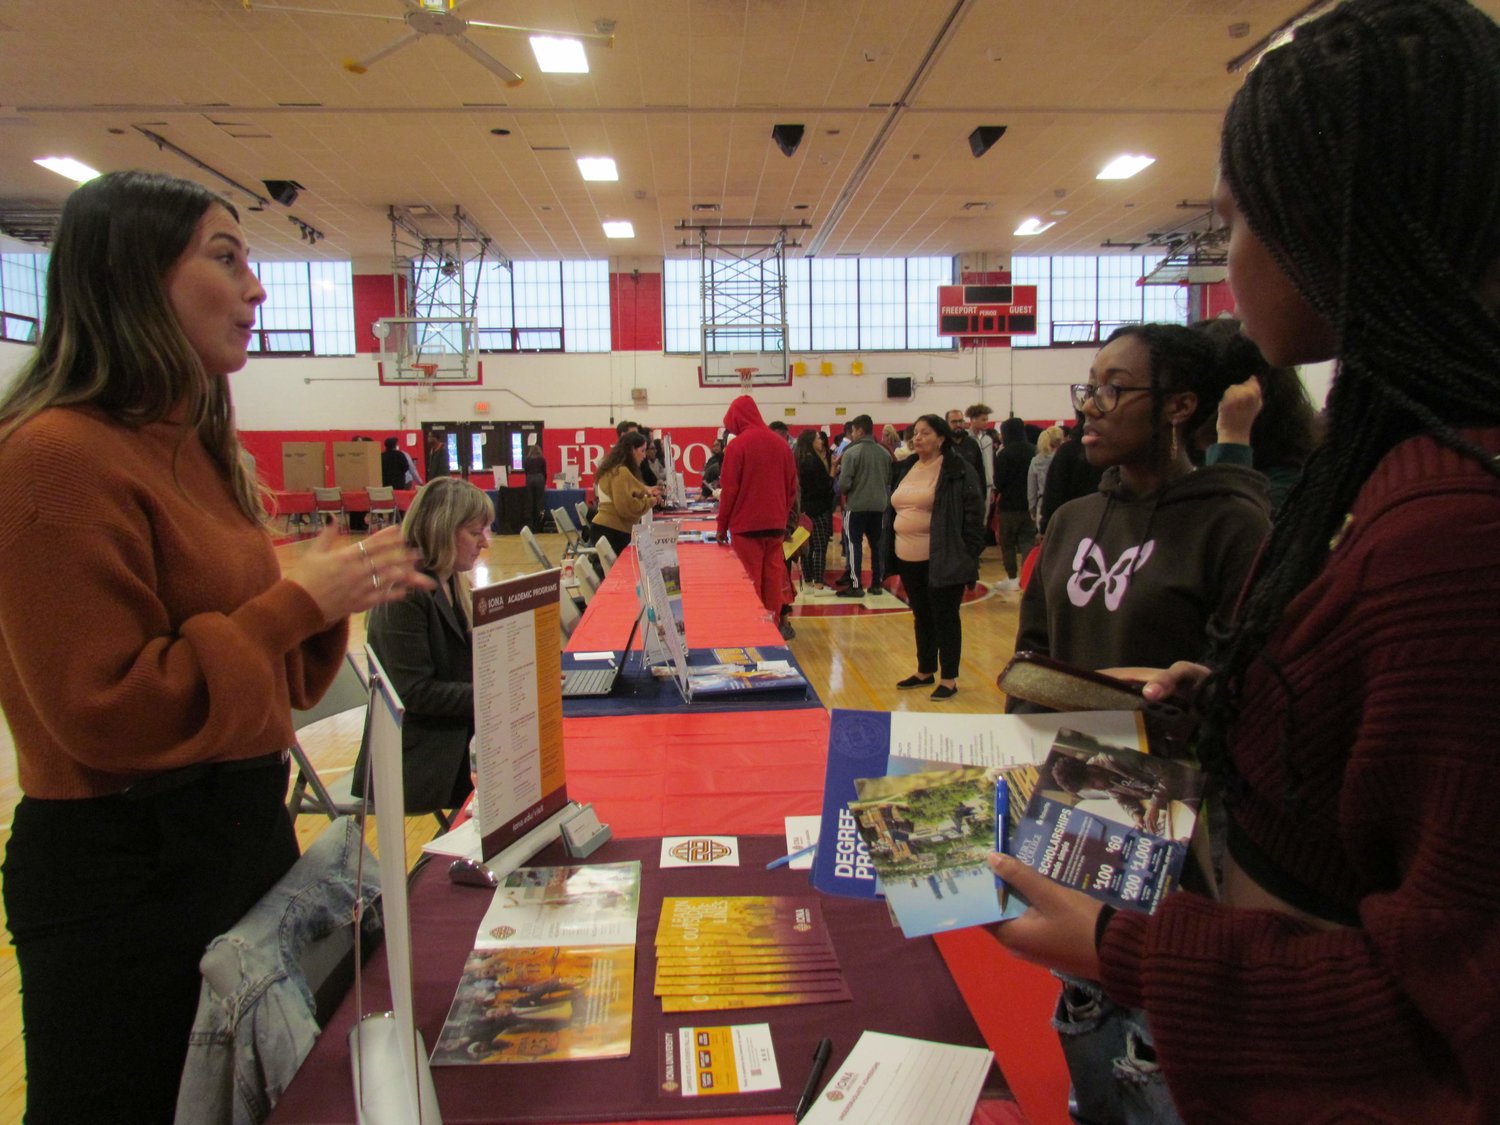 Representatives from numerous colleges, universities, and technical schools provided valuable information during Freeport High School’s Bound for College Fair and Workshops.